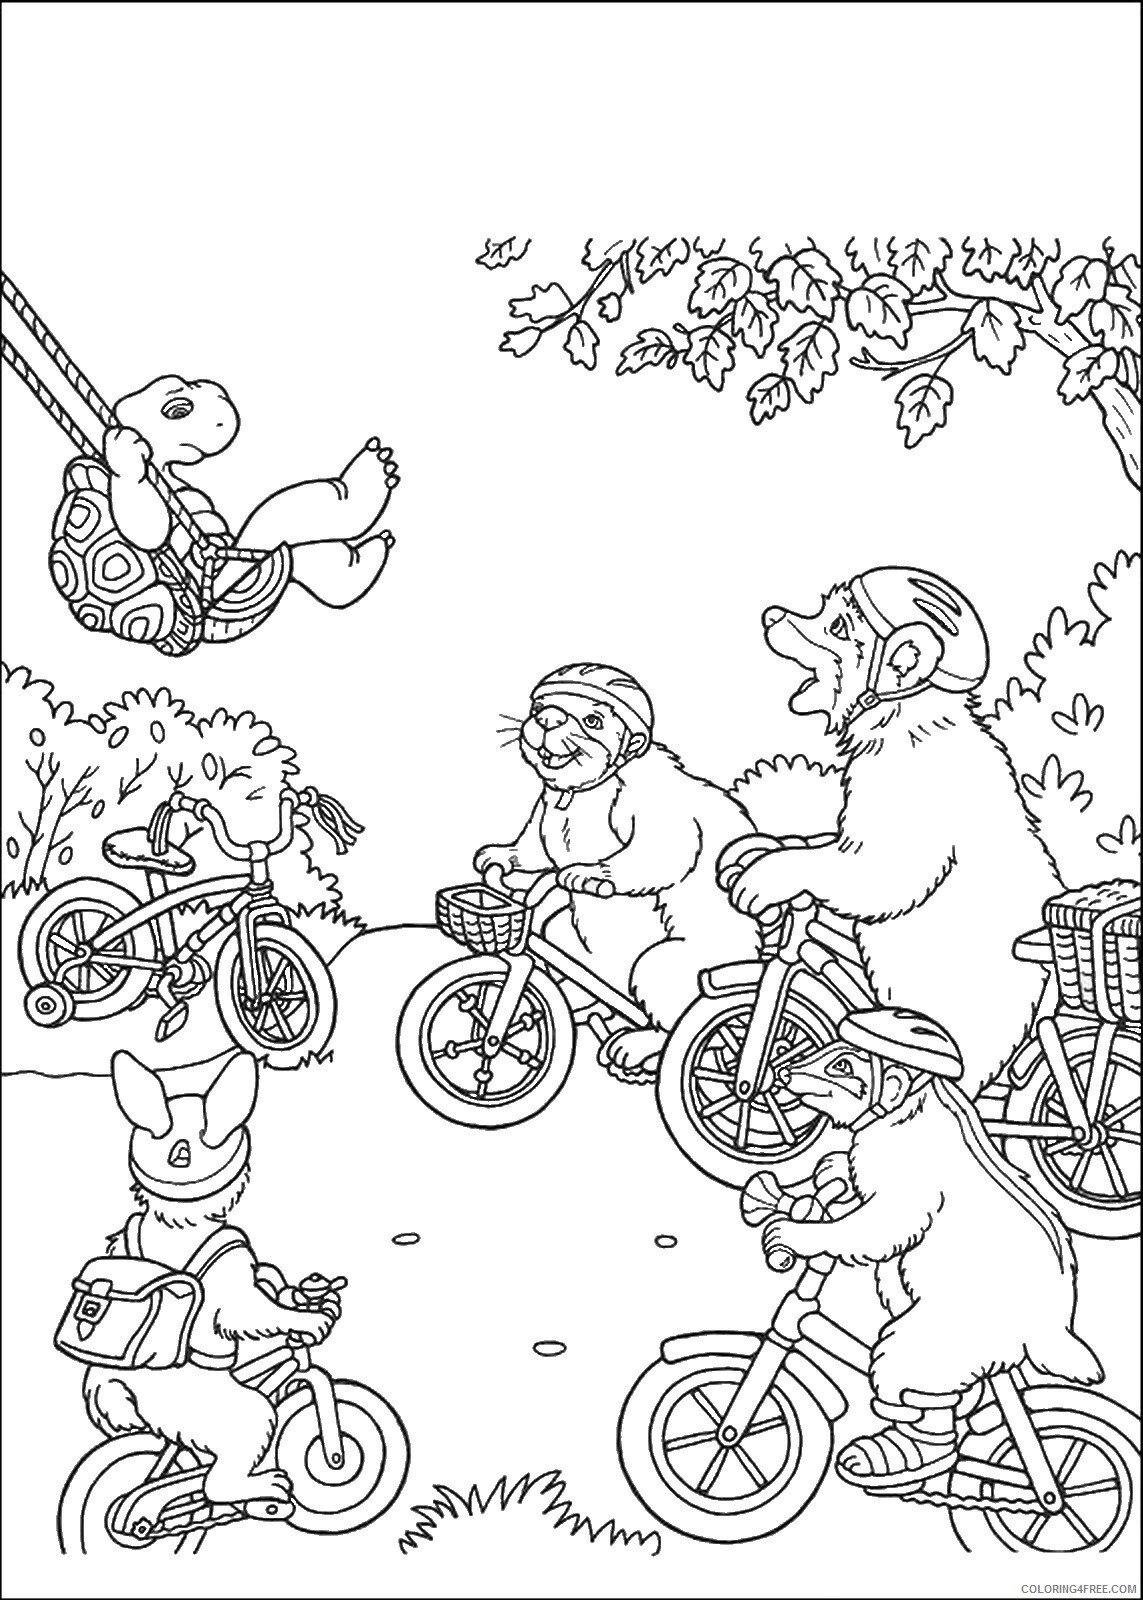 Franklin and Friends Coloring Pages TV Film franklin_cl_30 Printable 2020 03027 Coloring4free